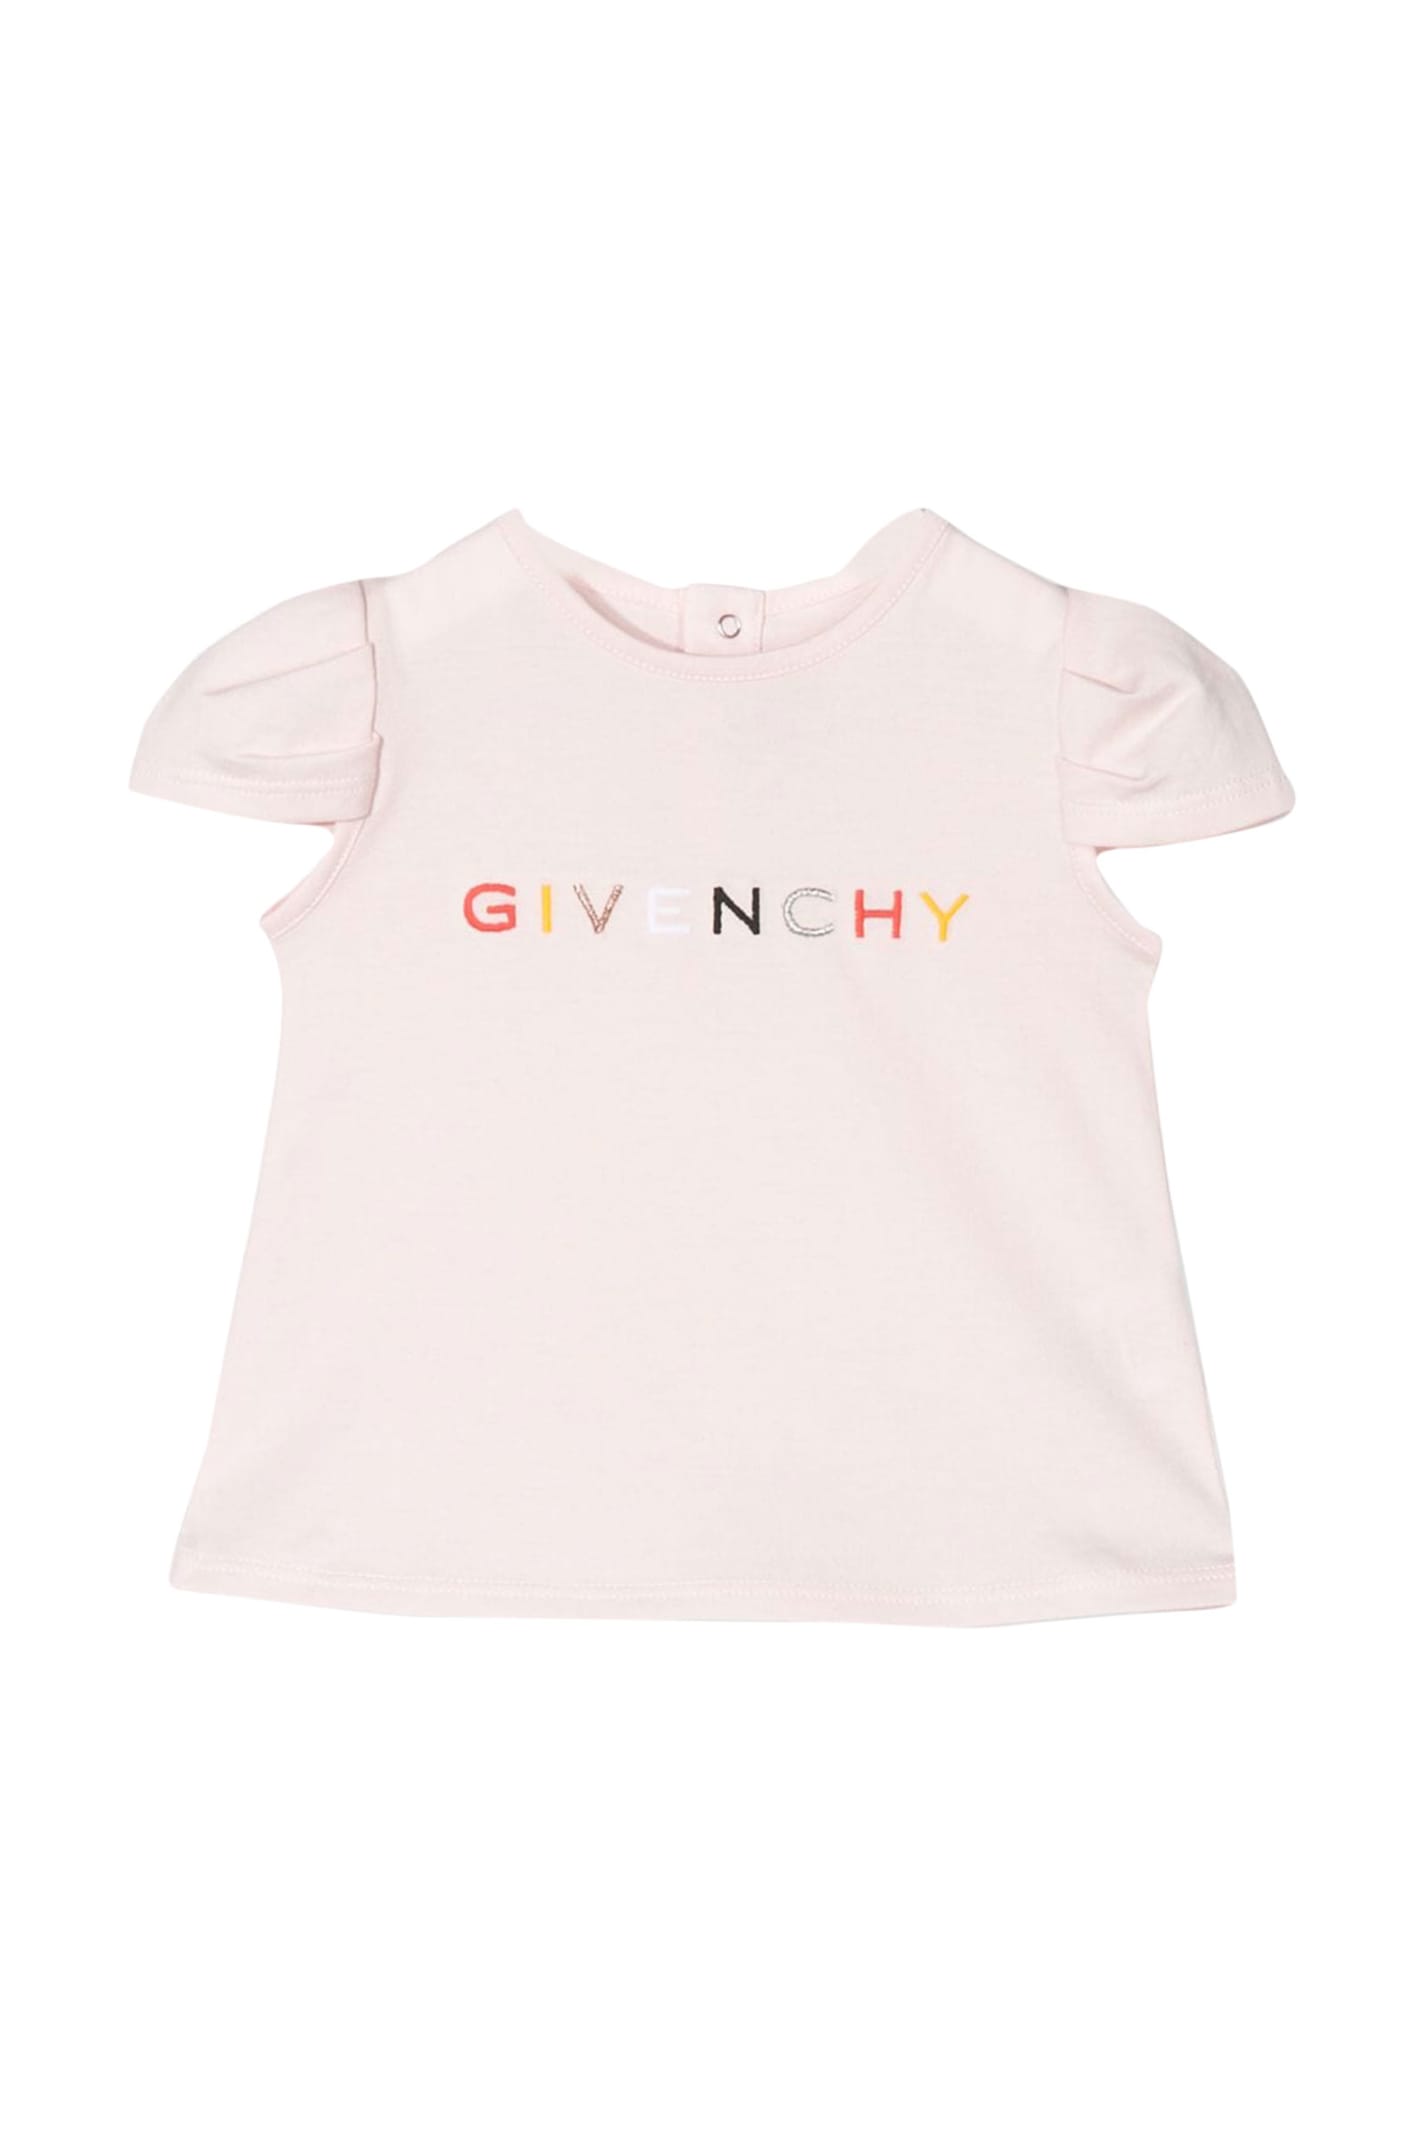 GIVENCHY KIDS LOGO EMBROIDERED T-SHIRT,11206529